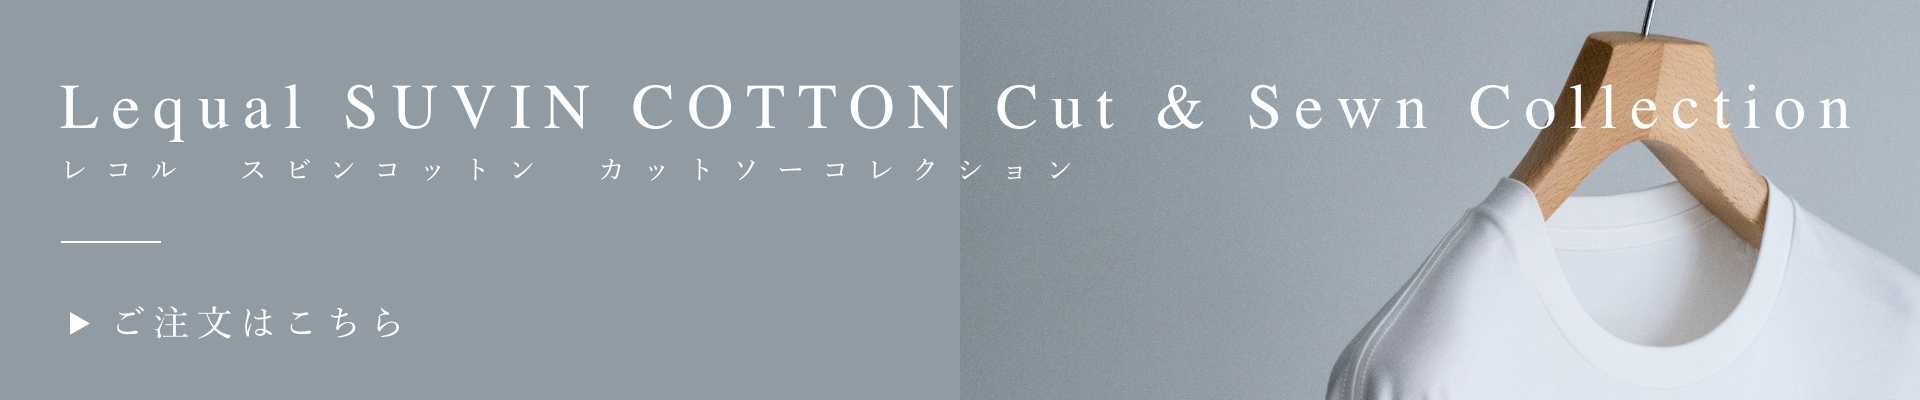 Lequal SUVIN COTTON Cut & Sewn Collection Banner